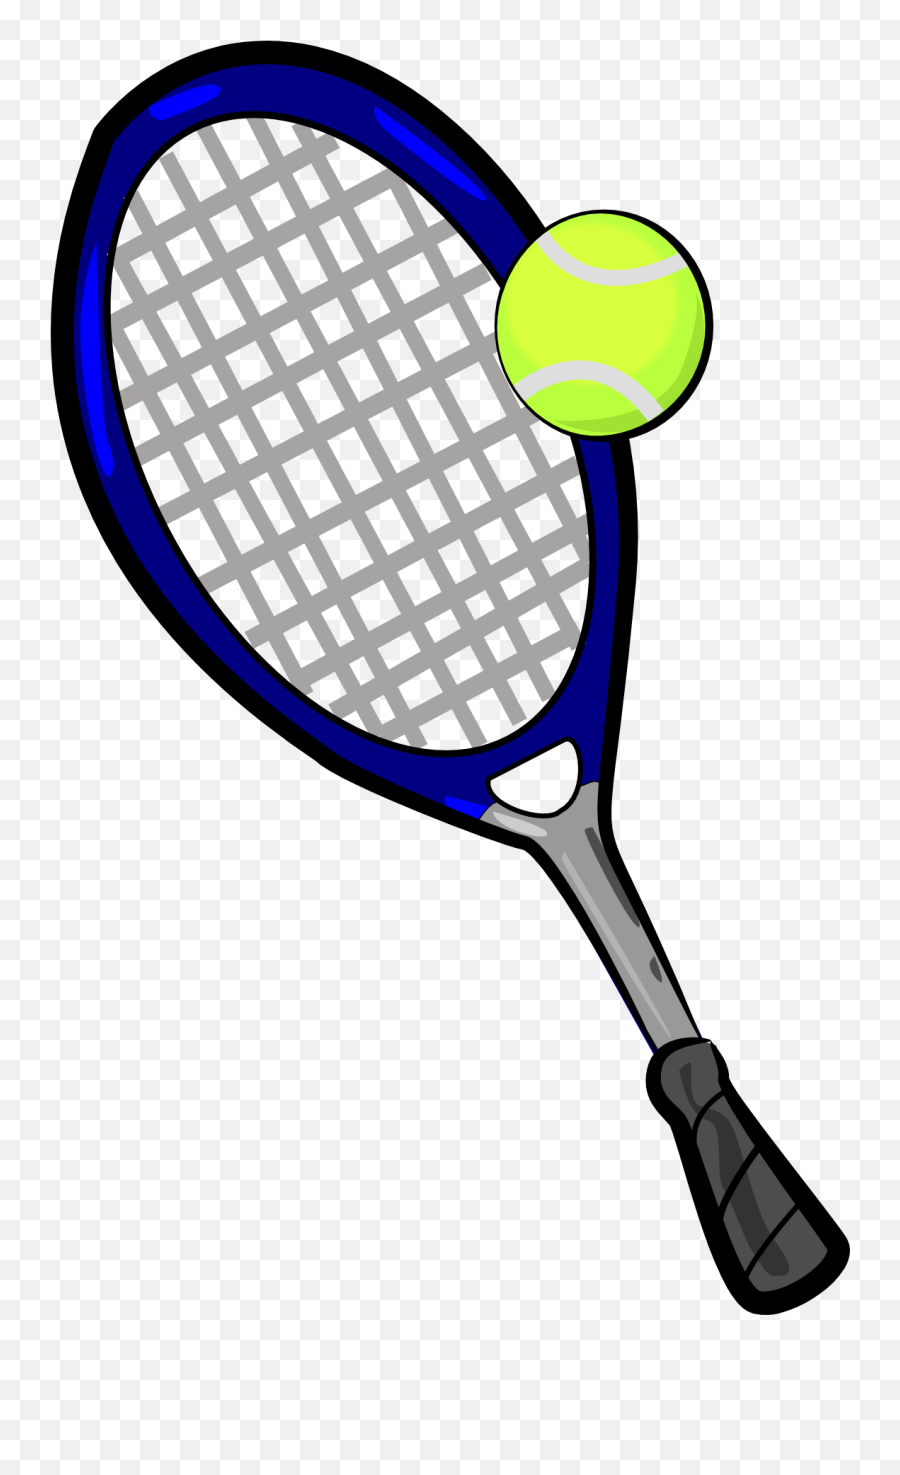 Download Tennis Ball And Racket Png Clipart - Clip Art Tennis Racket,Tennis Ball Png